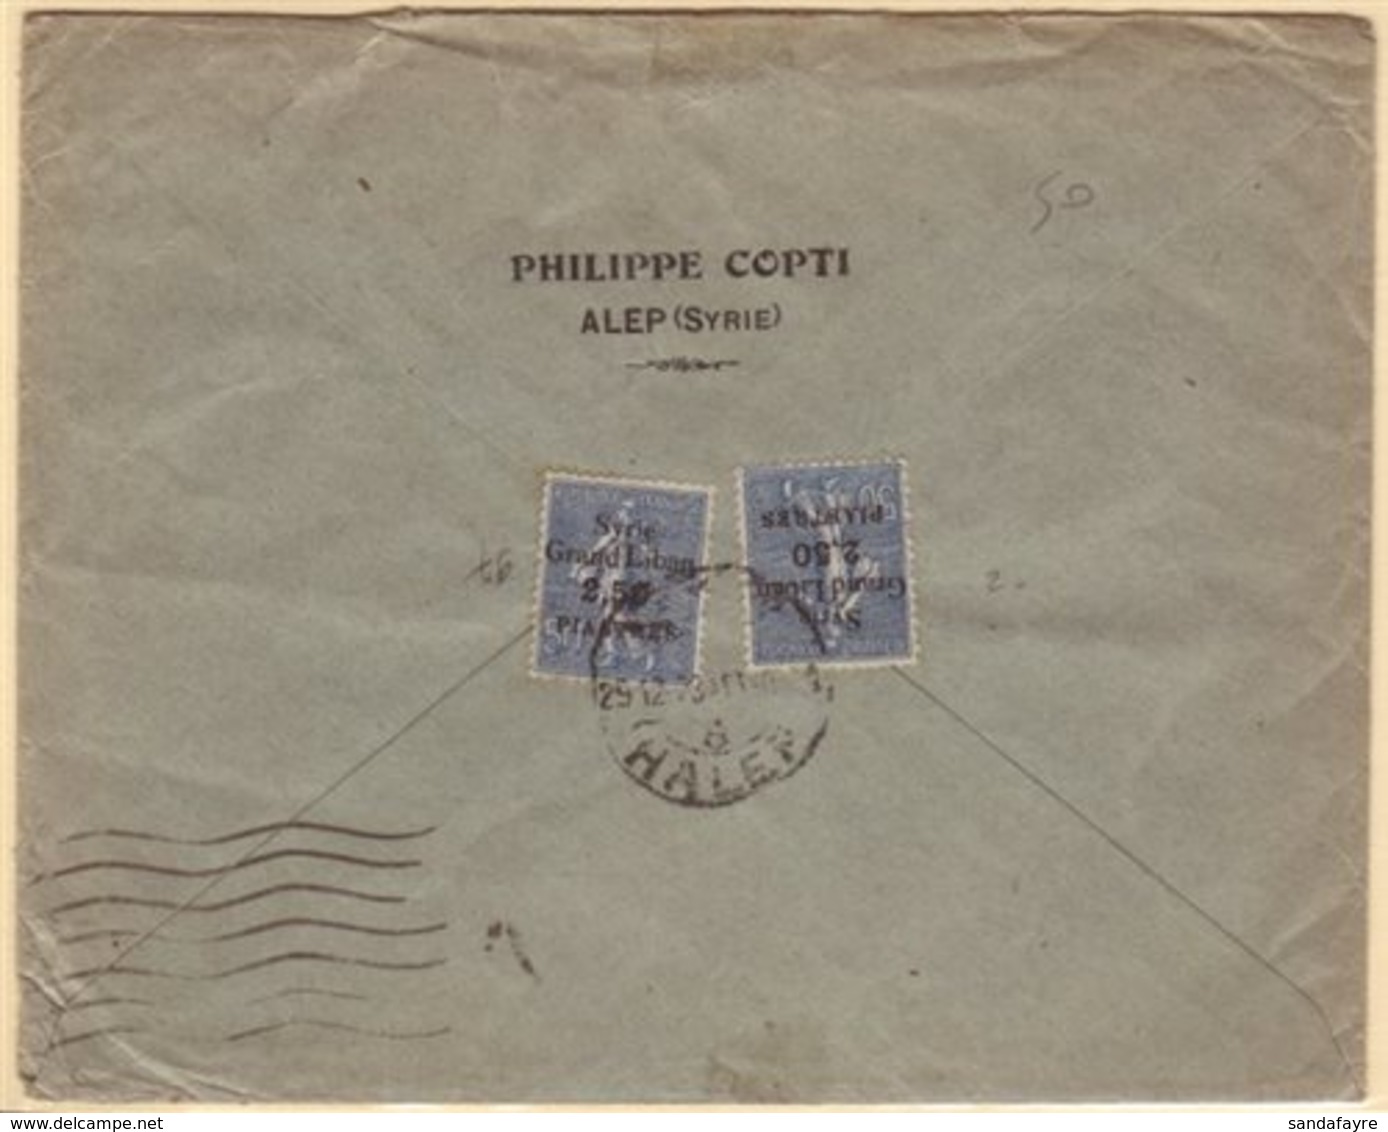 1923 Commercial Cover To France, Franked Two 1923 2.50pi On 50c "Syrie Grand Liban" Overprints, SG 105, HALEP C.d.s. Can - Syrie